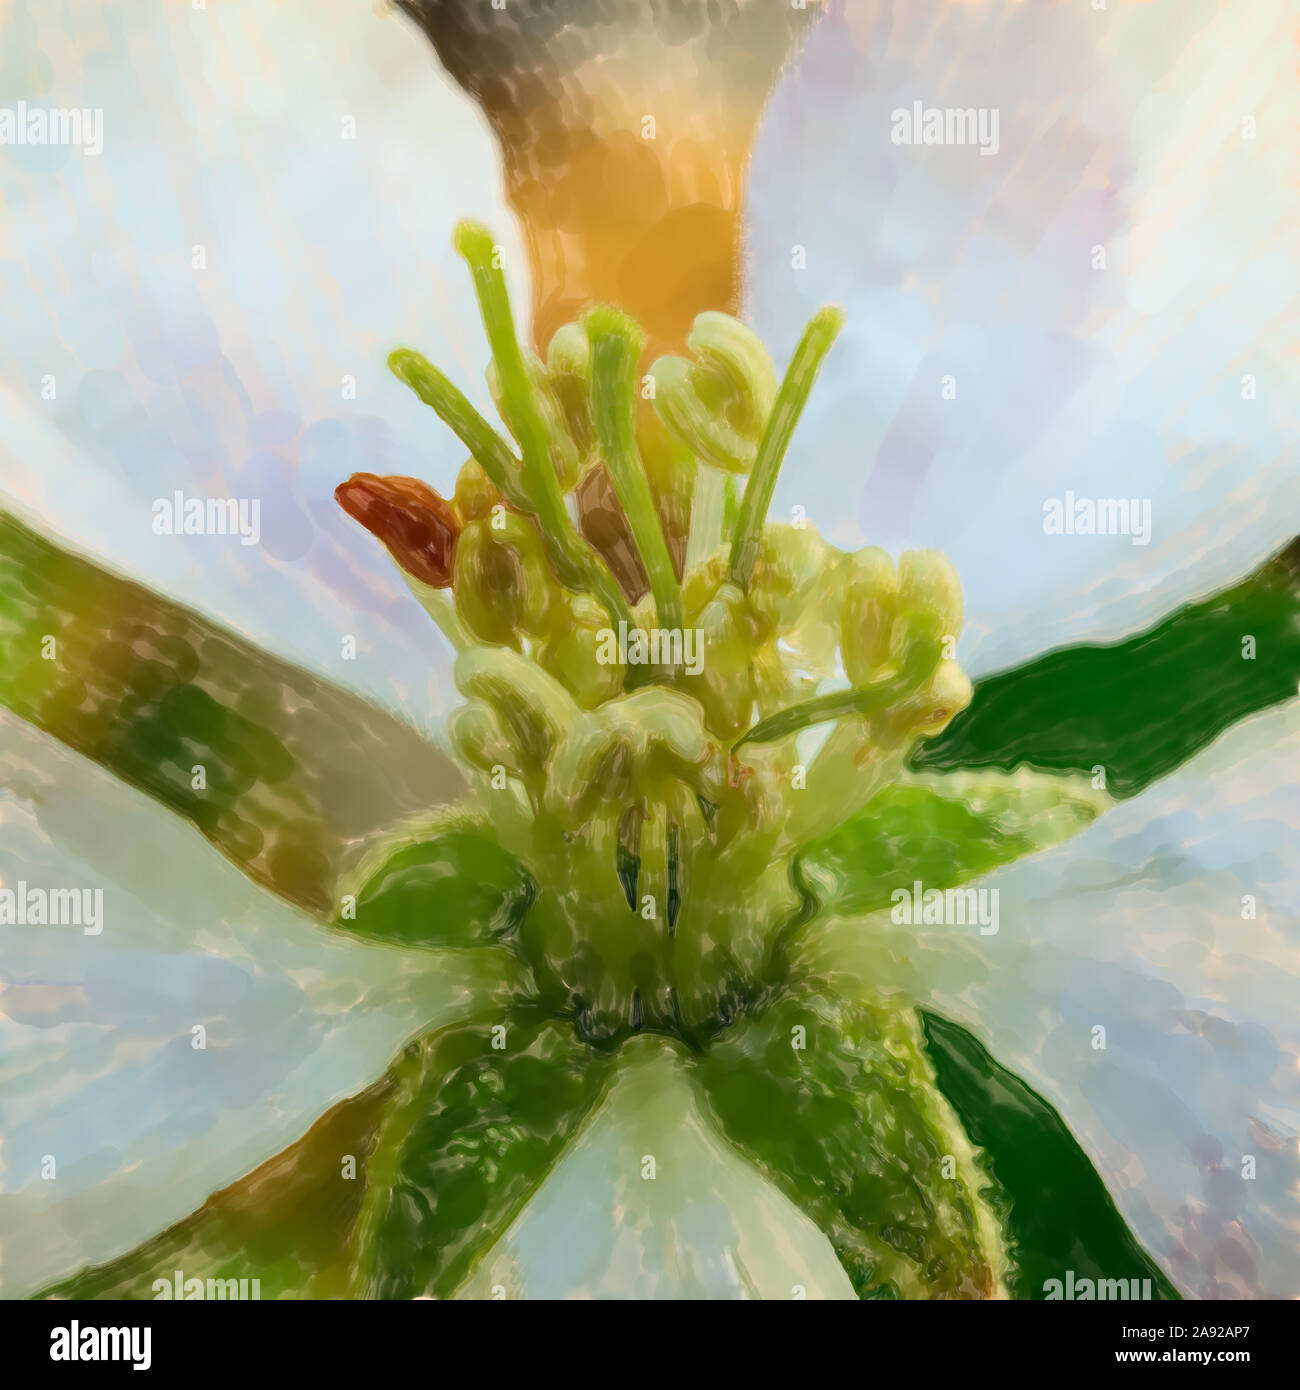 watercolor illustration: Macro photograph of the white blossom of an apple tree, scientific name Malus domestica, flower Stock Photo